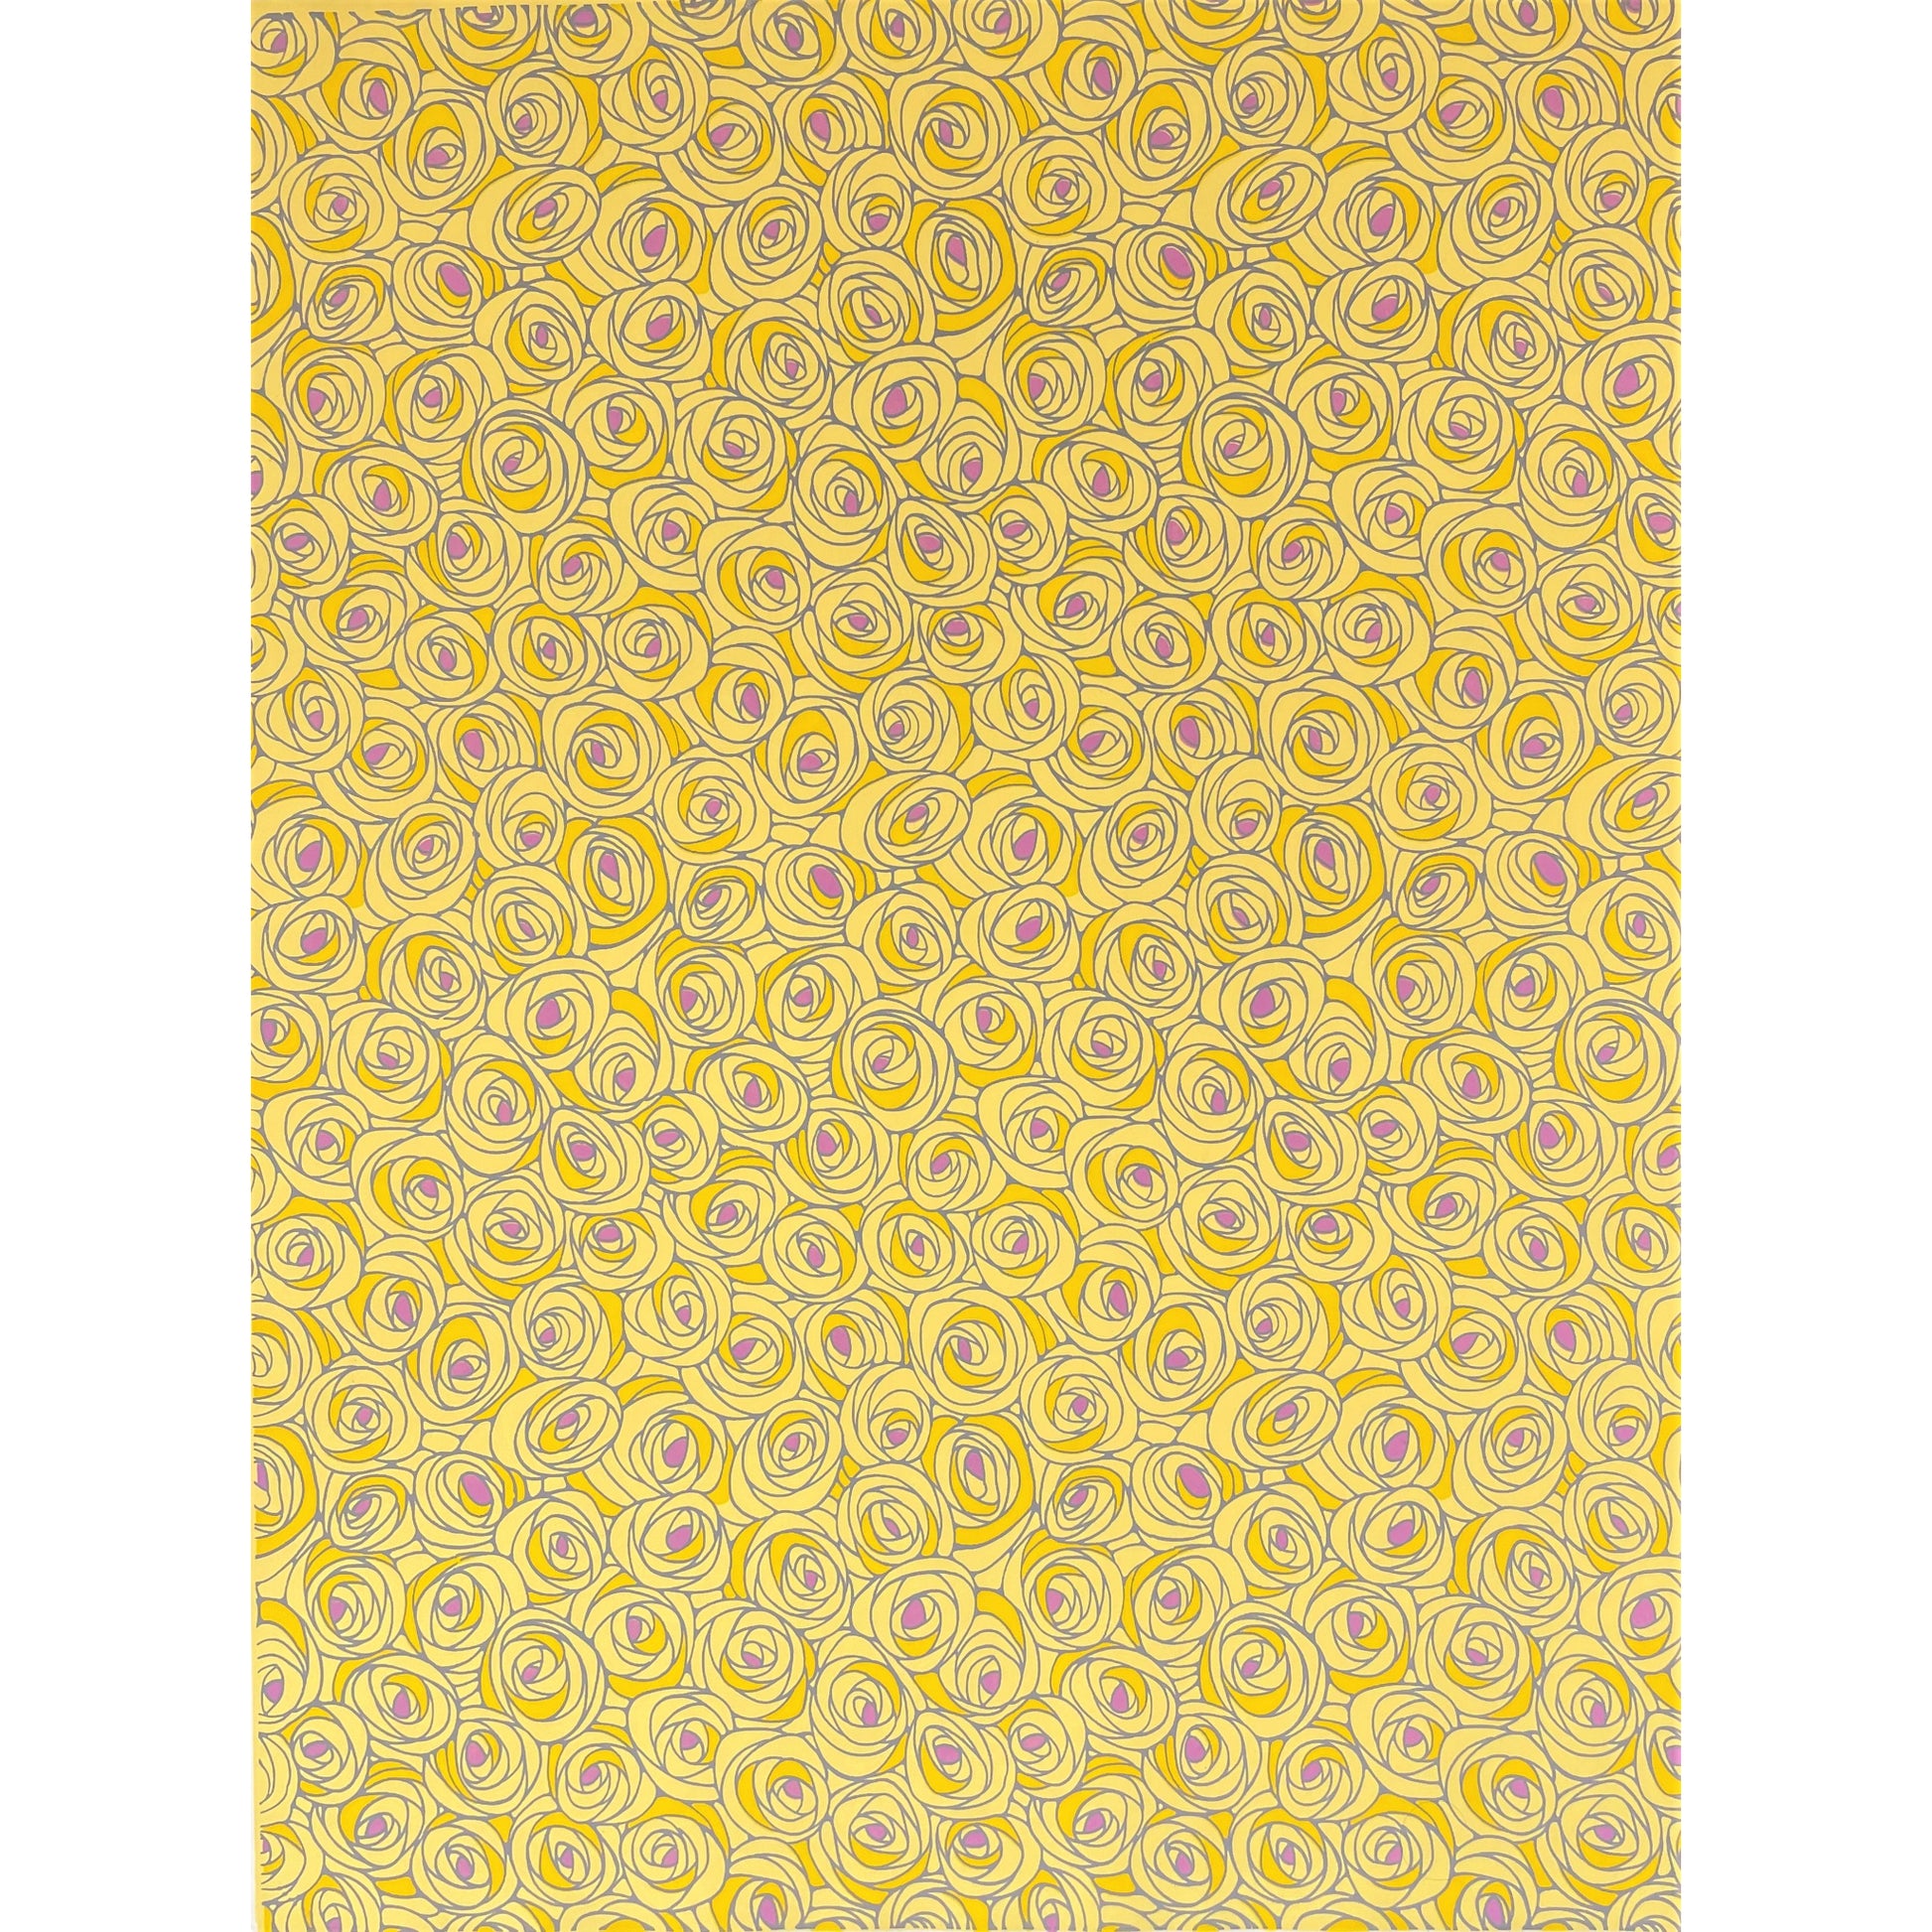 japanese silk-screen handmade paper showing yellow and lilac abstract floral pattern, full sheet view